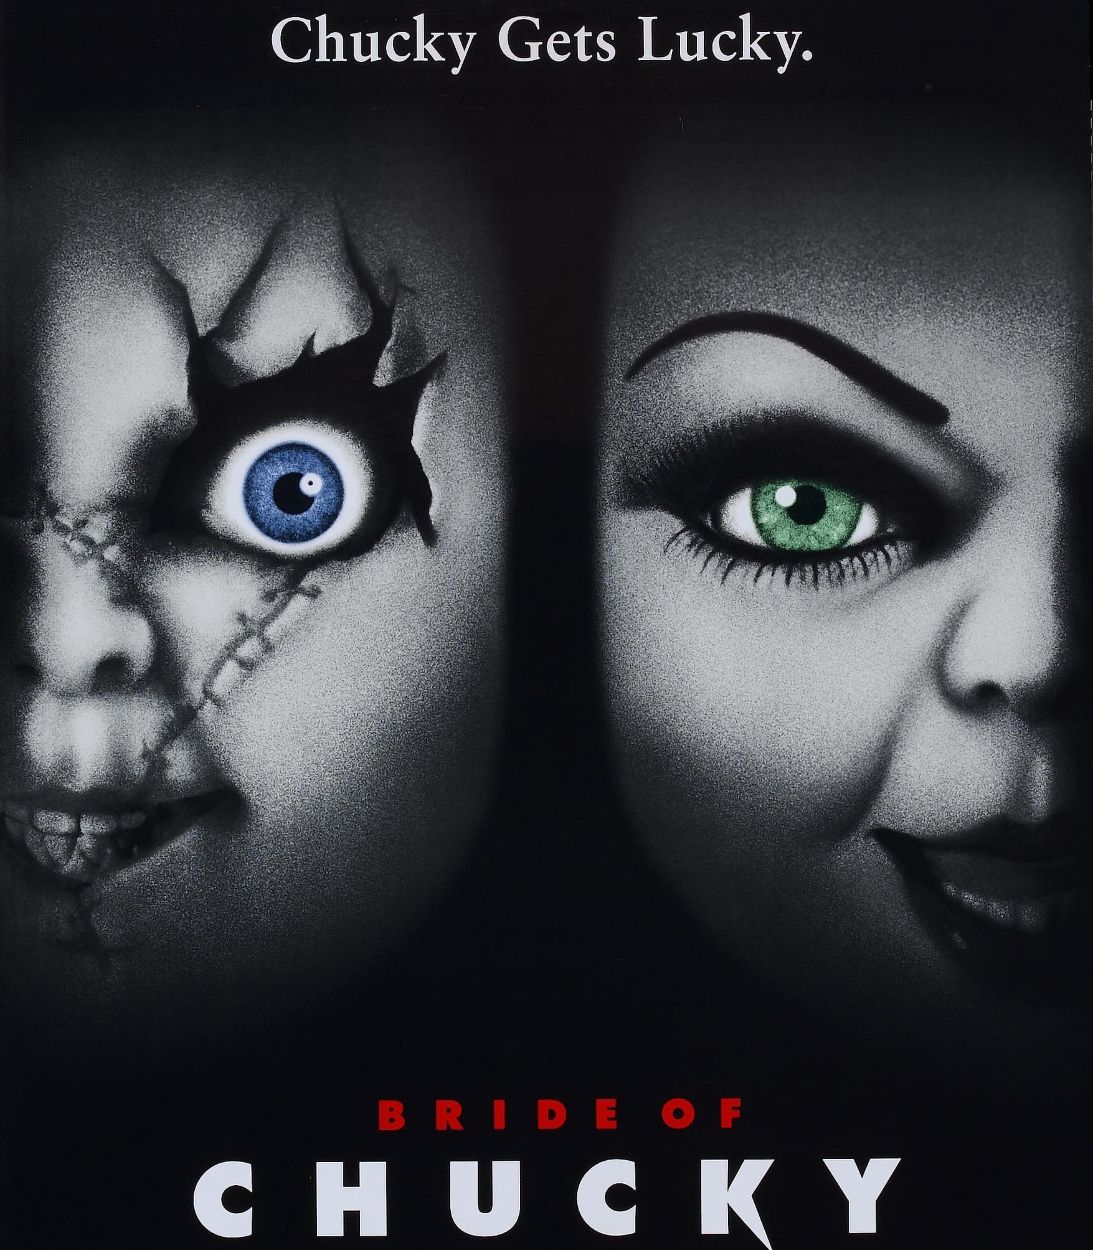 bride of chucky poster TDLR vertical